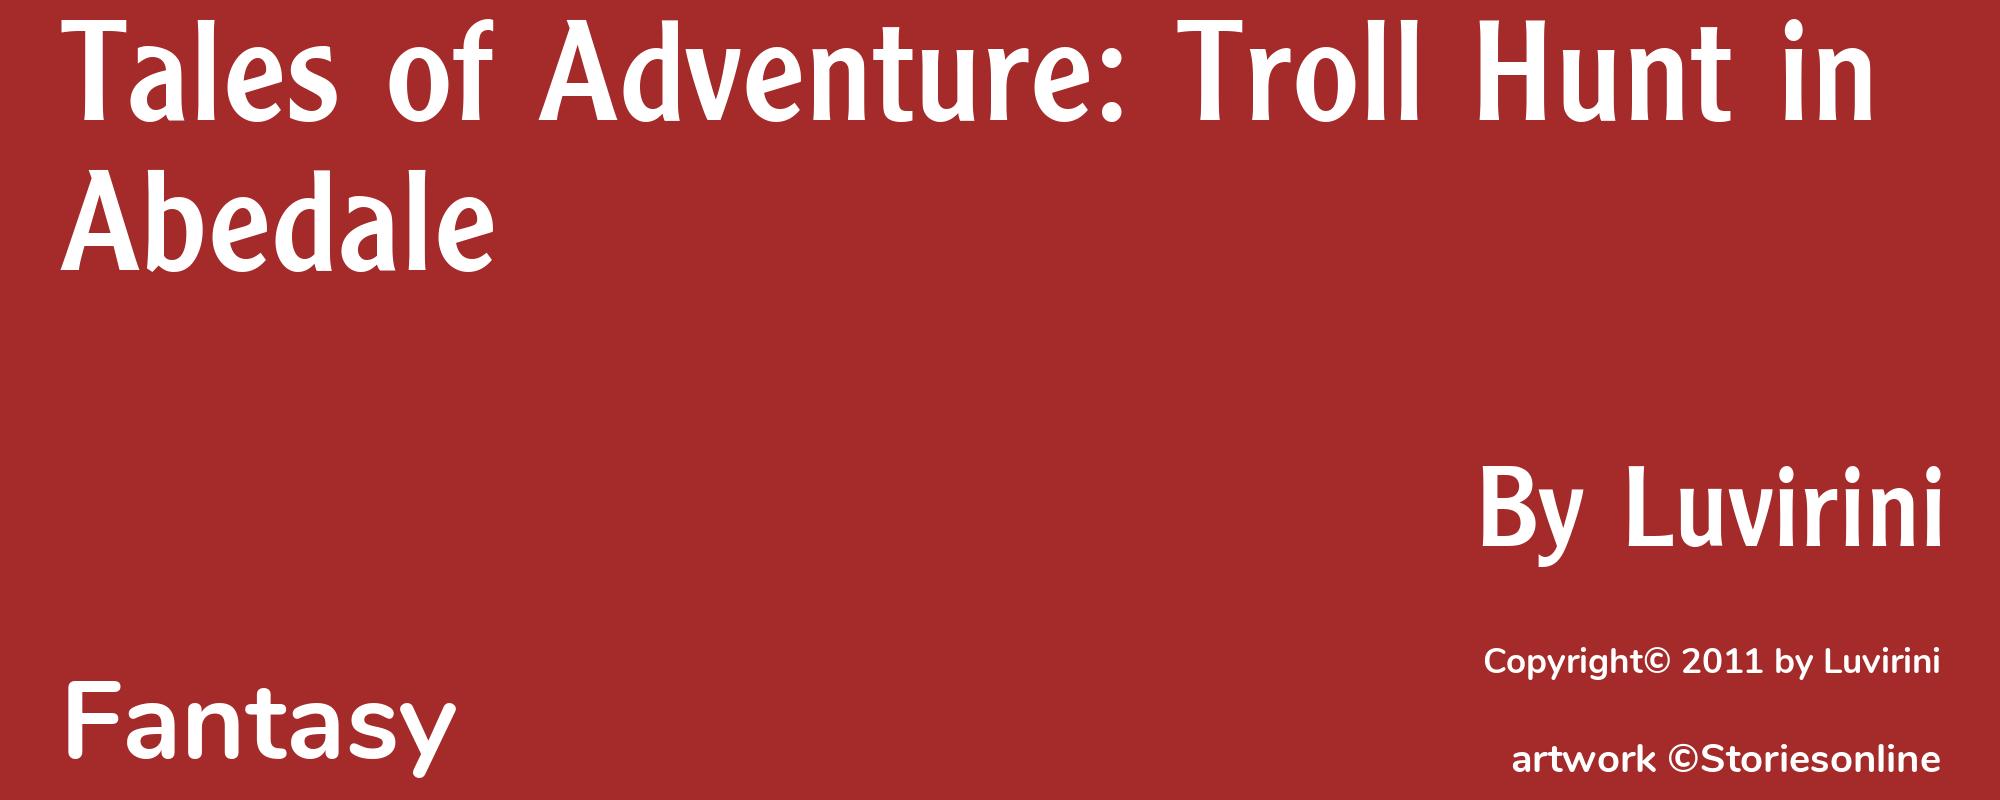 Tales of Adventure: Troll Hunt in Abedale - Cover